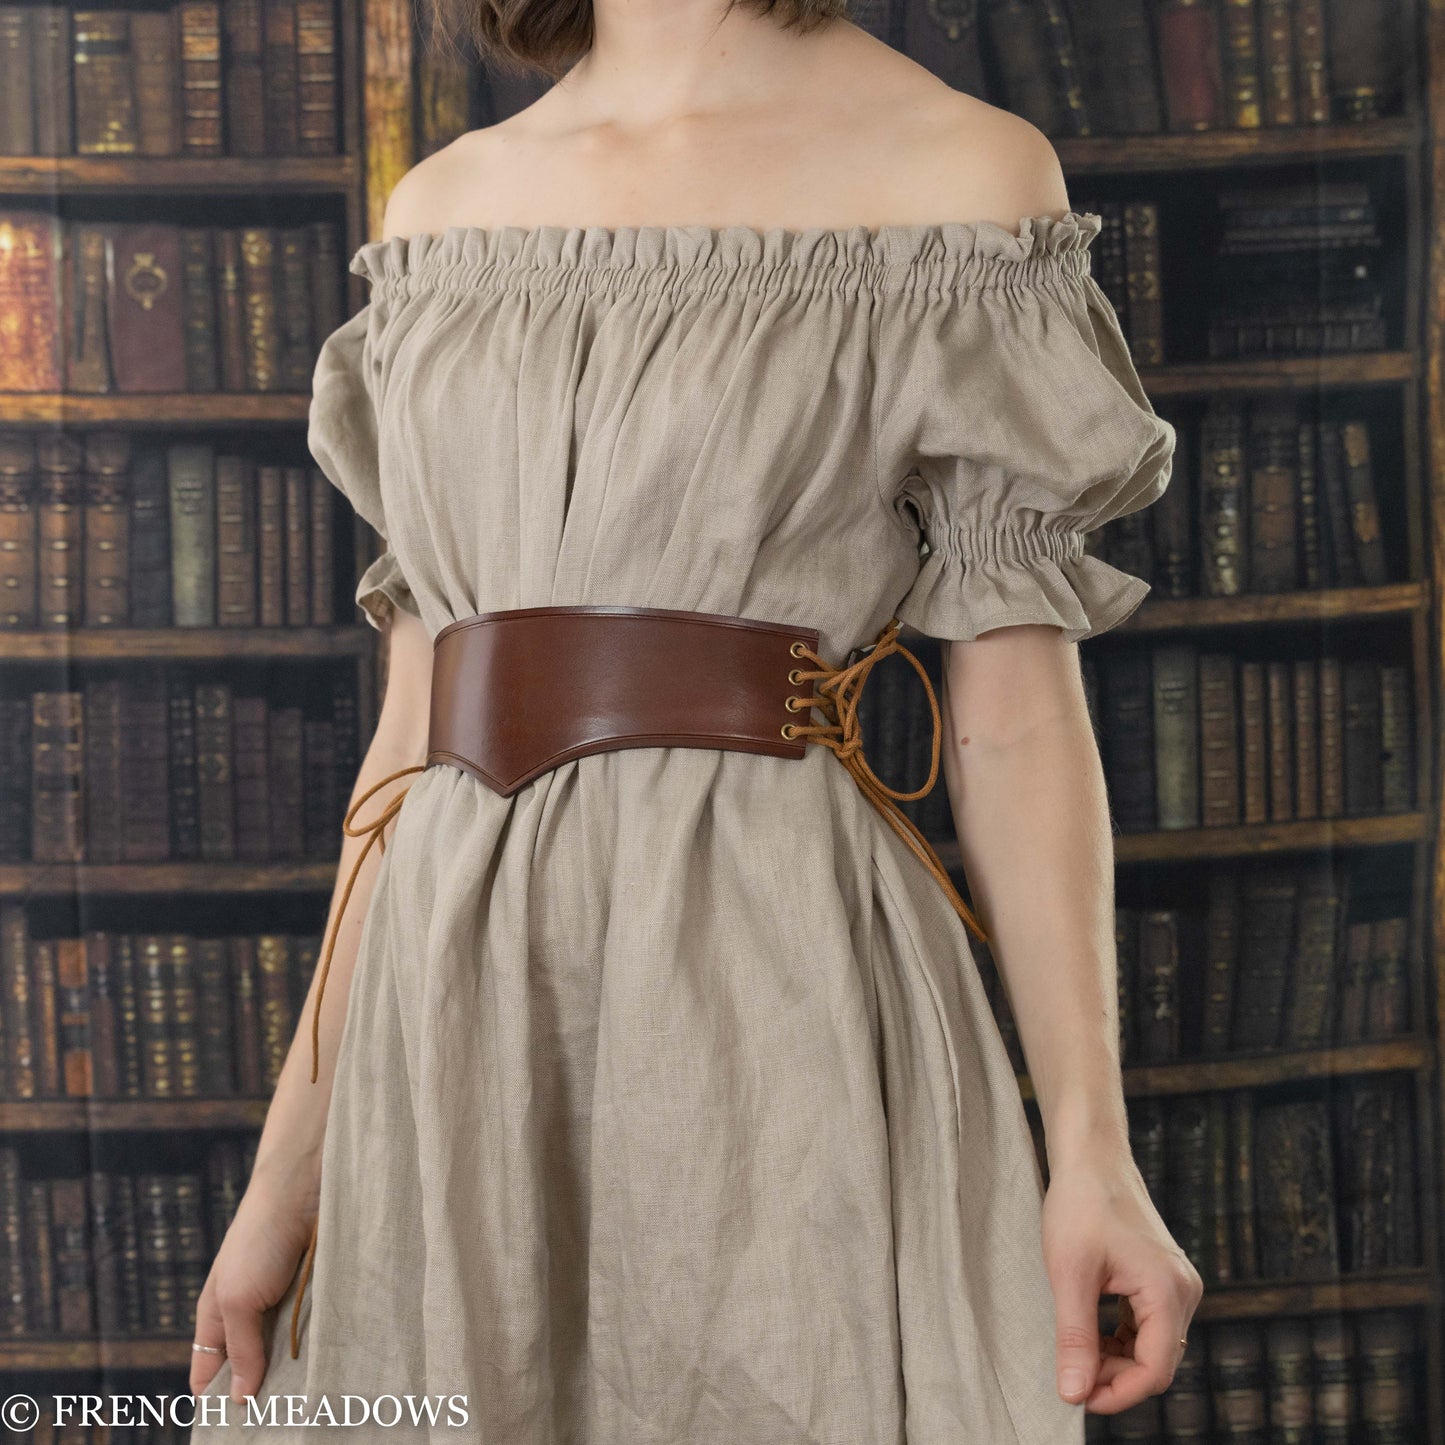 Medieval corset in leather, dark brown This leather belt is a nice